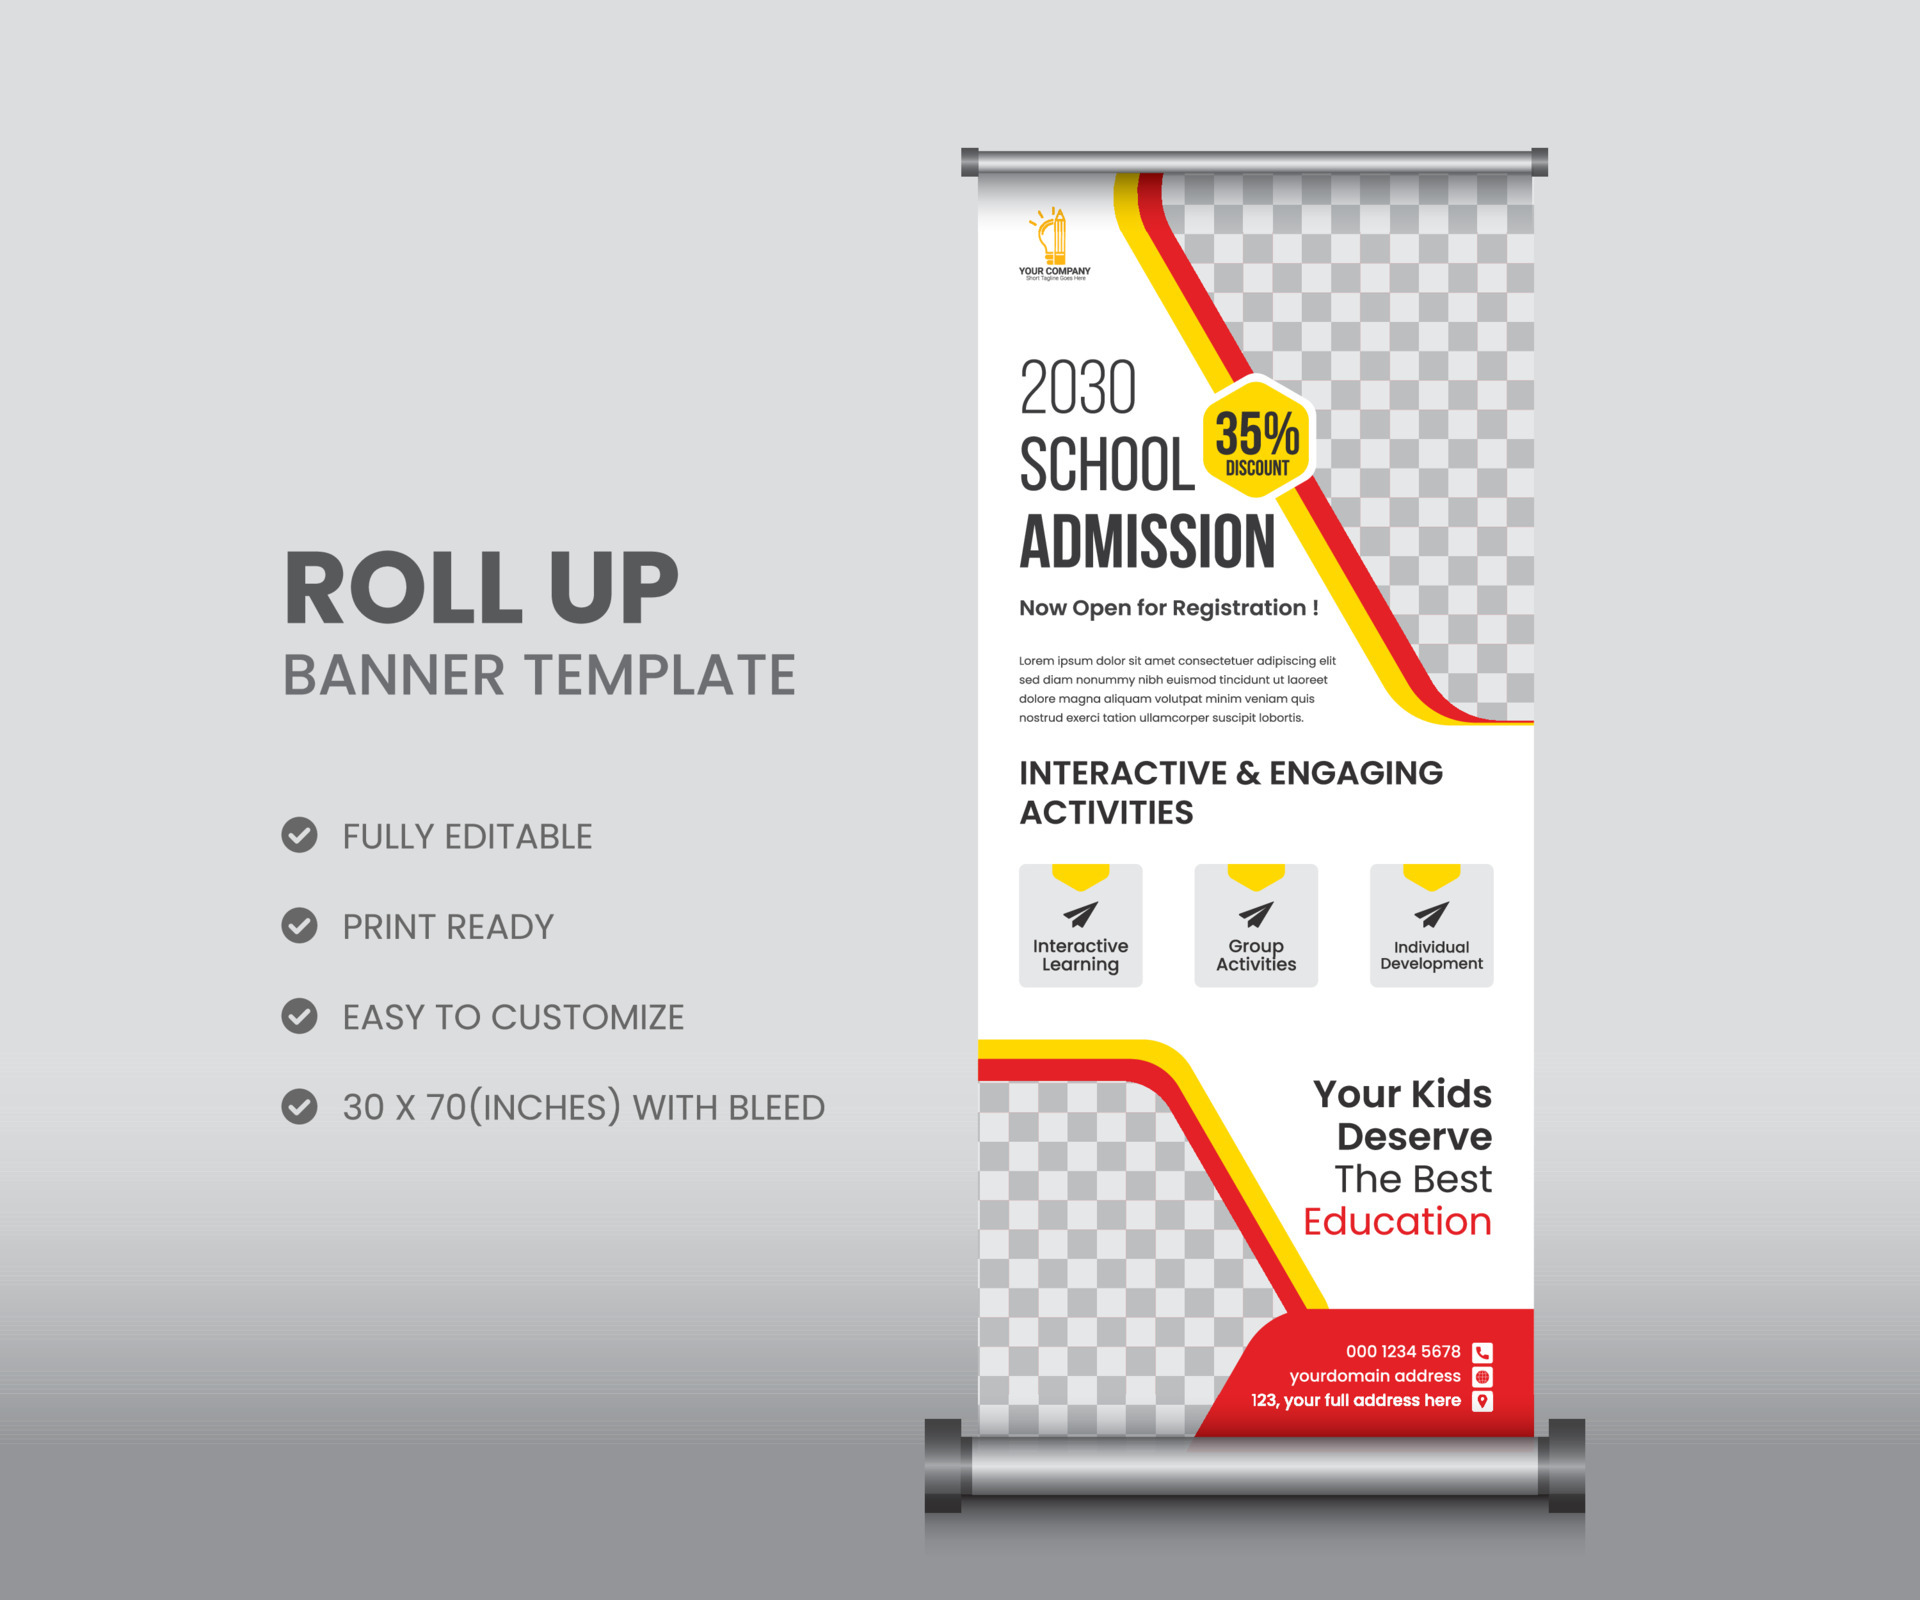 School admission roll up banner template